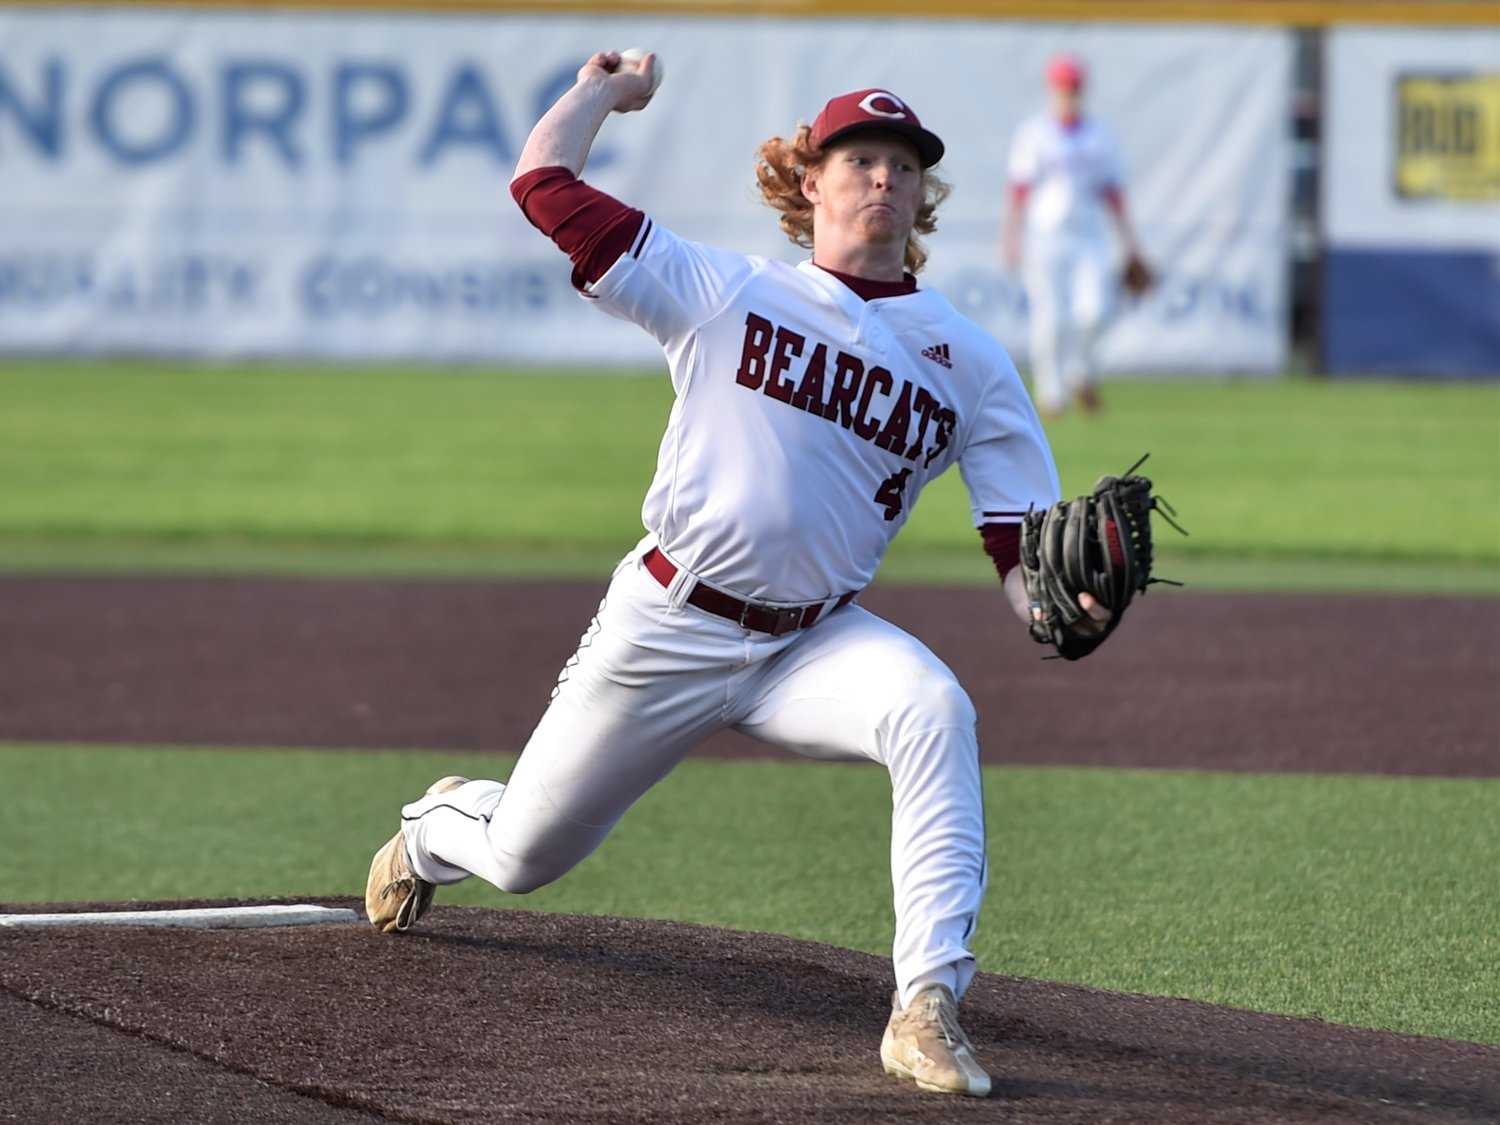 W.F. West’s Logan Moore hurls a pitch during the Senior All-Star Game on Wednesday, June 1, at David Story Field.